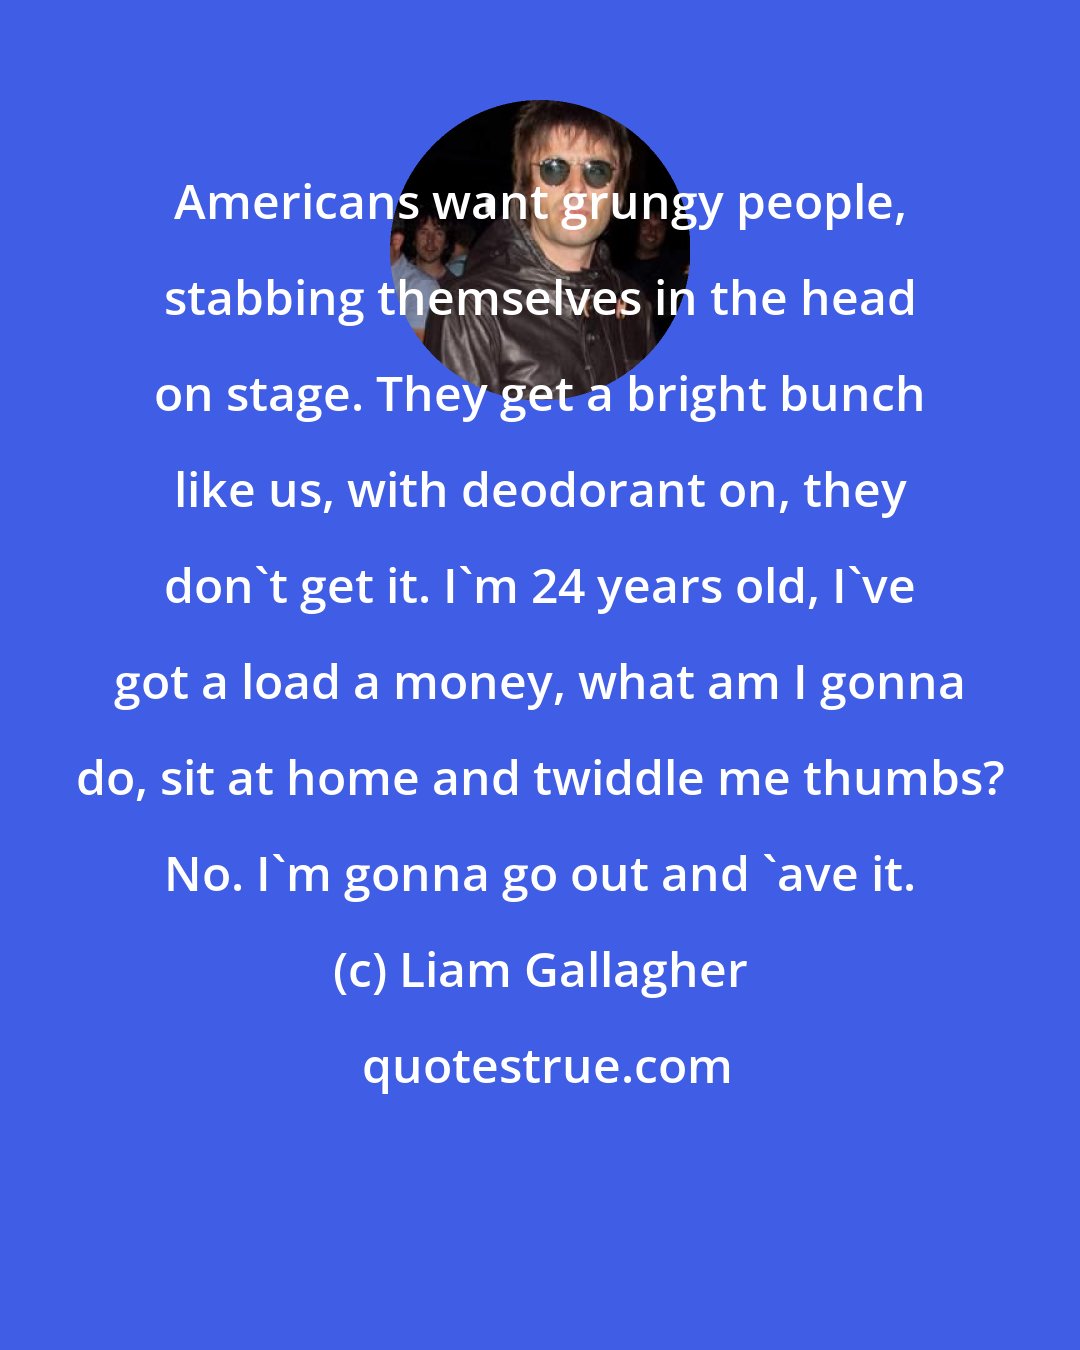 Liam Gallagher: Americans want grungy people, stabbing themselves in the head on stage. They get a bright bunch like us, with deodorant on, they don't get it. I'm 24 years old, I've got a load a money, what am I gonna do, sit at home and twiddle me thumbs? No. I'm gonna go out and 'ave it.